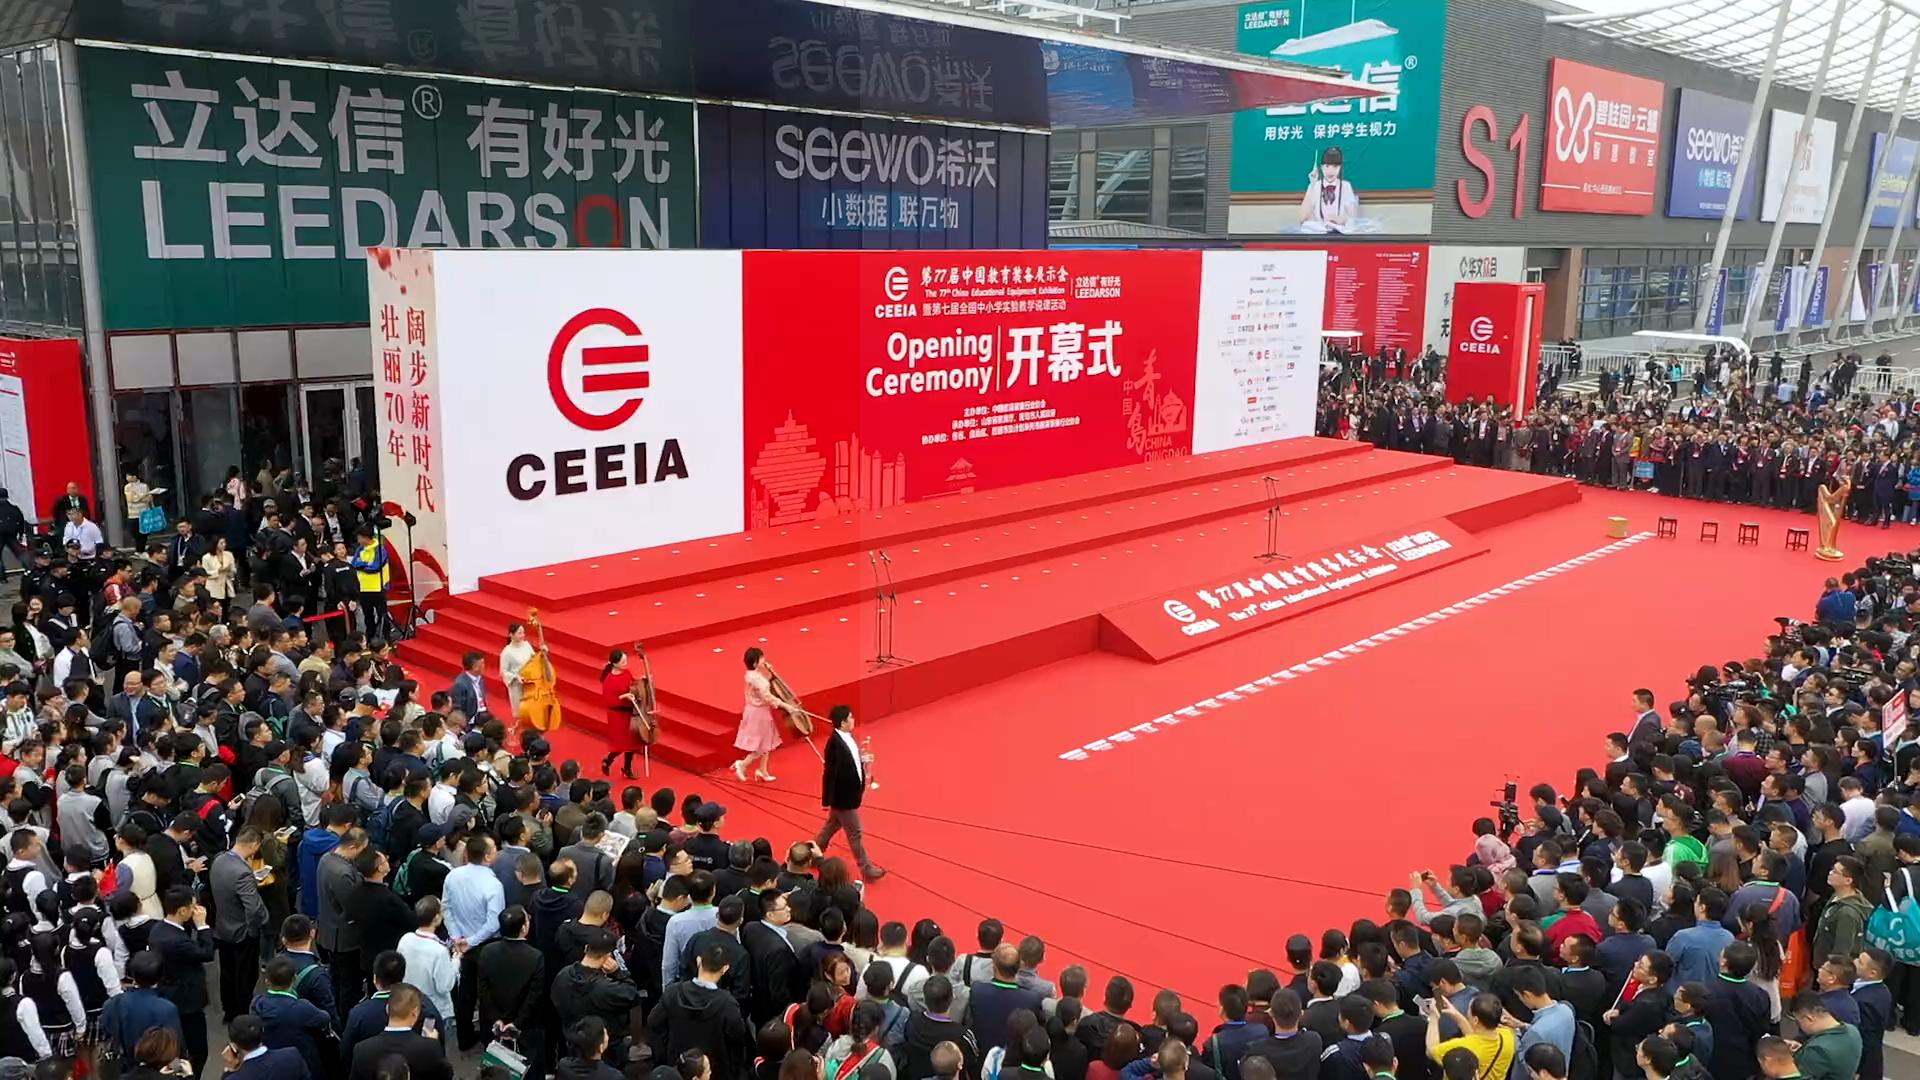 The open ceremony of 77th China Educational Equipment Exhibition - "My Motherland And I"